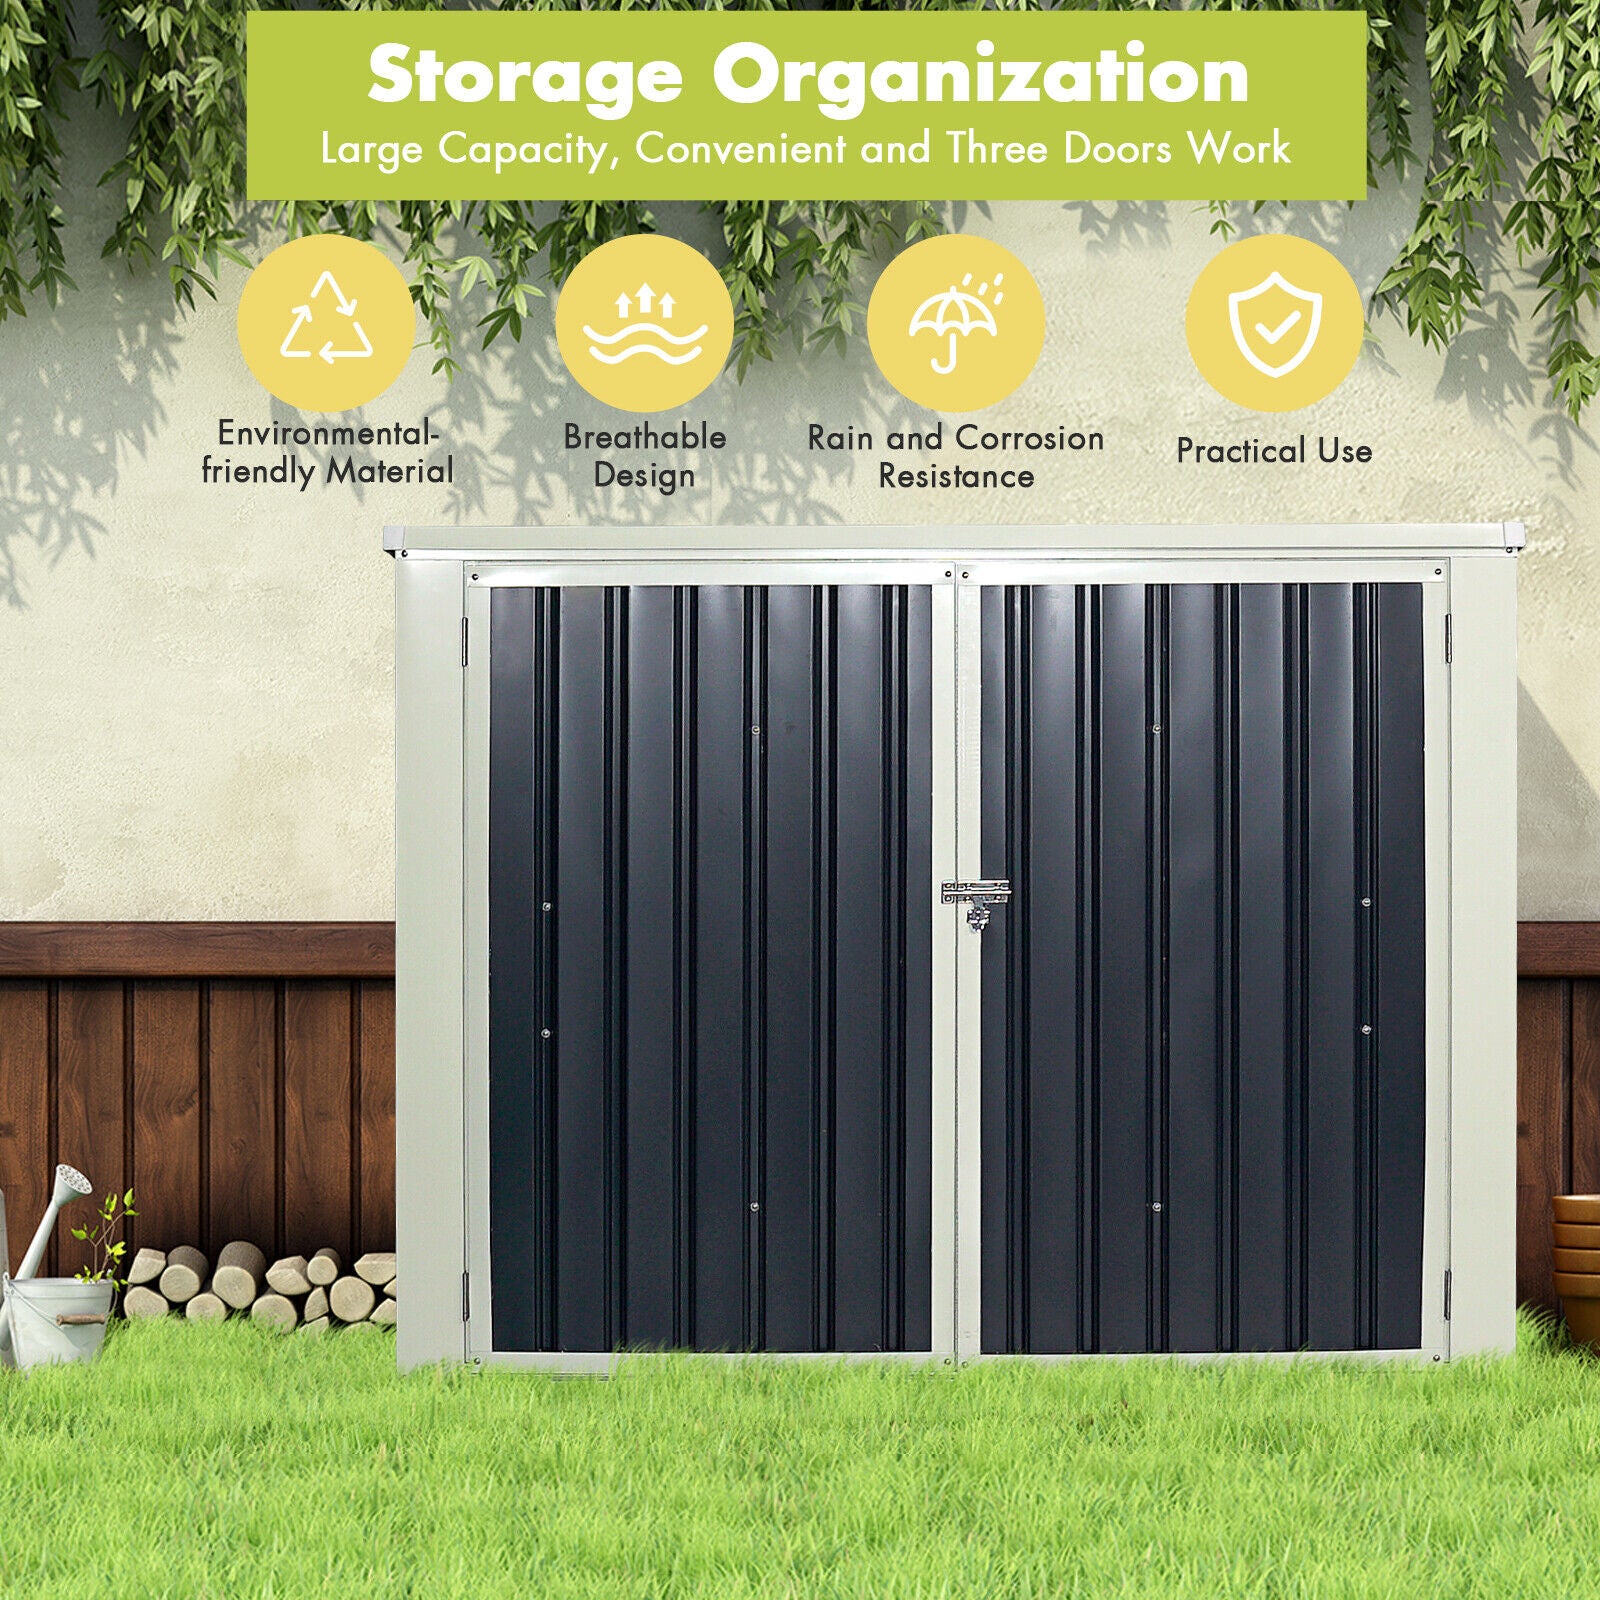 6 x 3FT Outdoor Horizontal Storage Shed Multifunctional Metal Garbage Can Storage Shed for Garden Yard